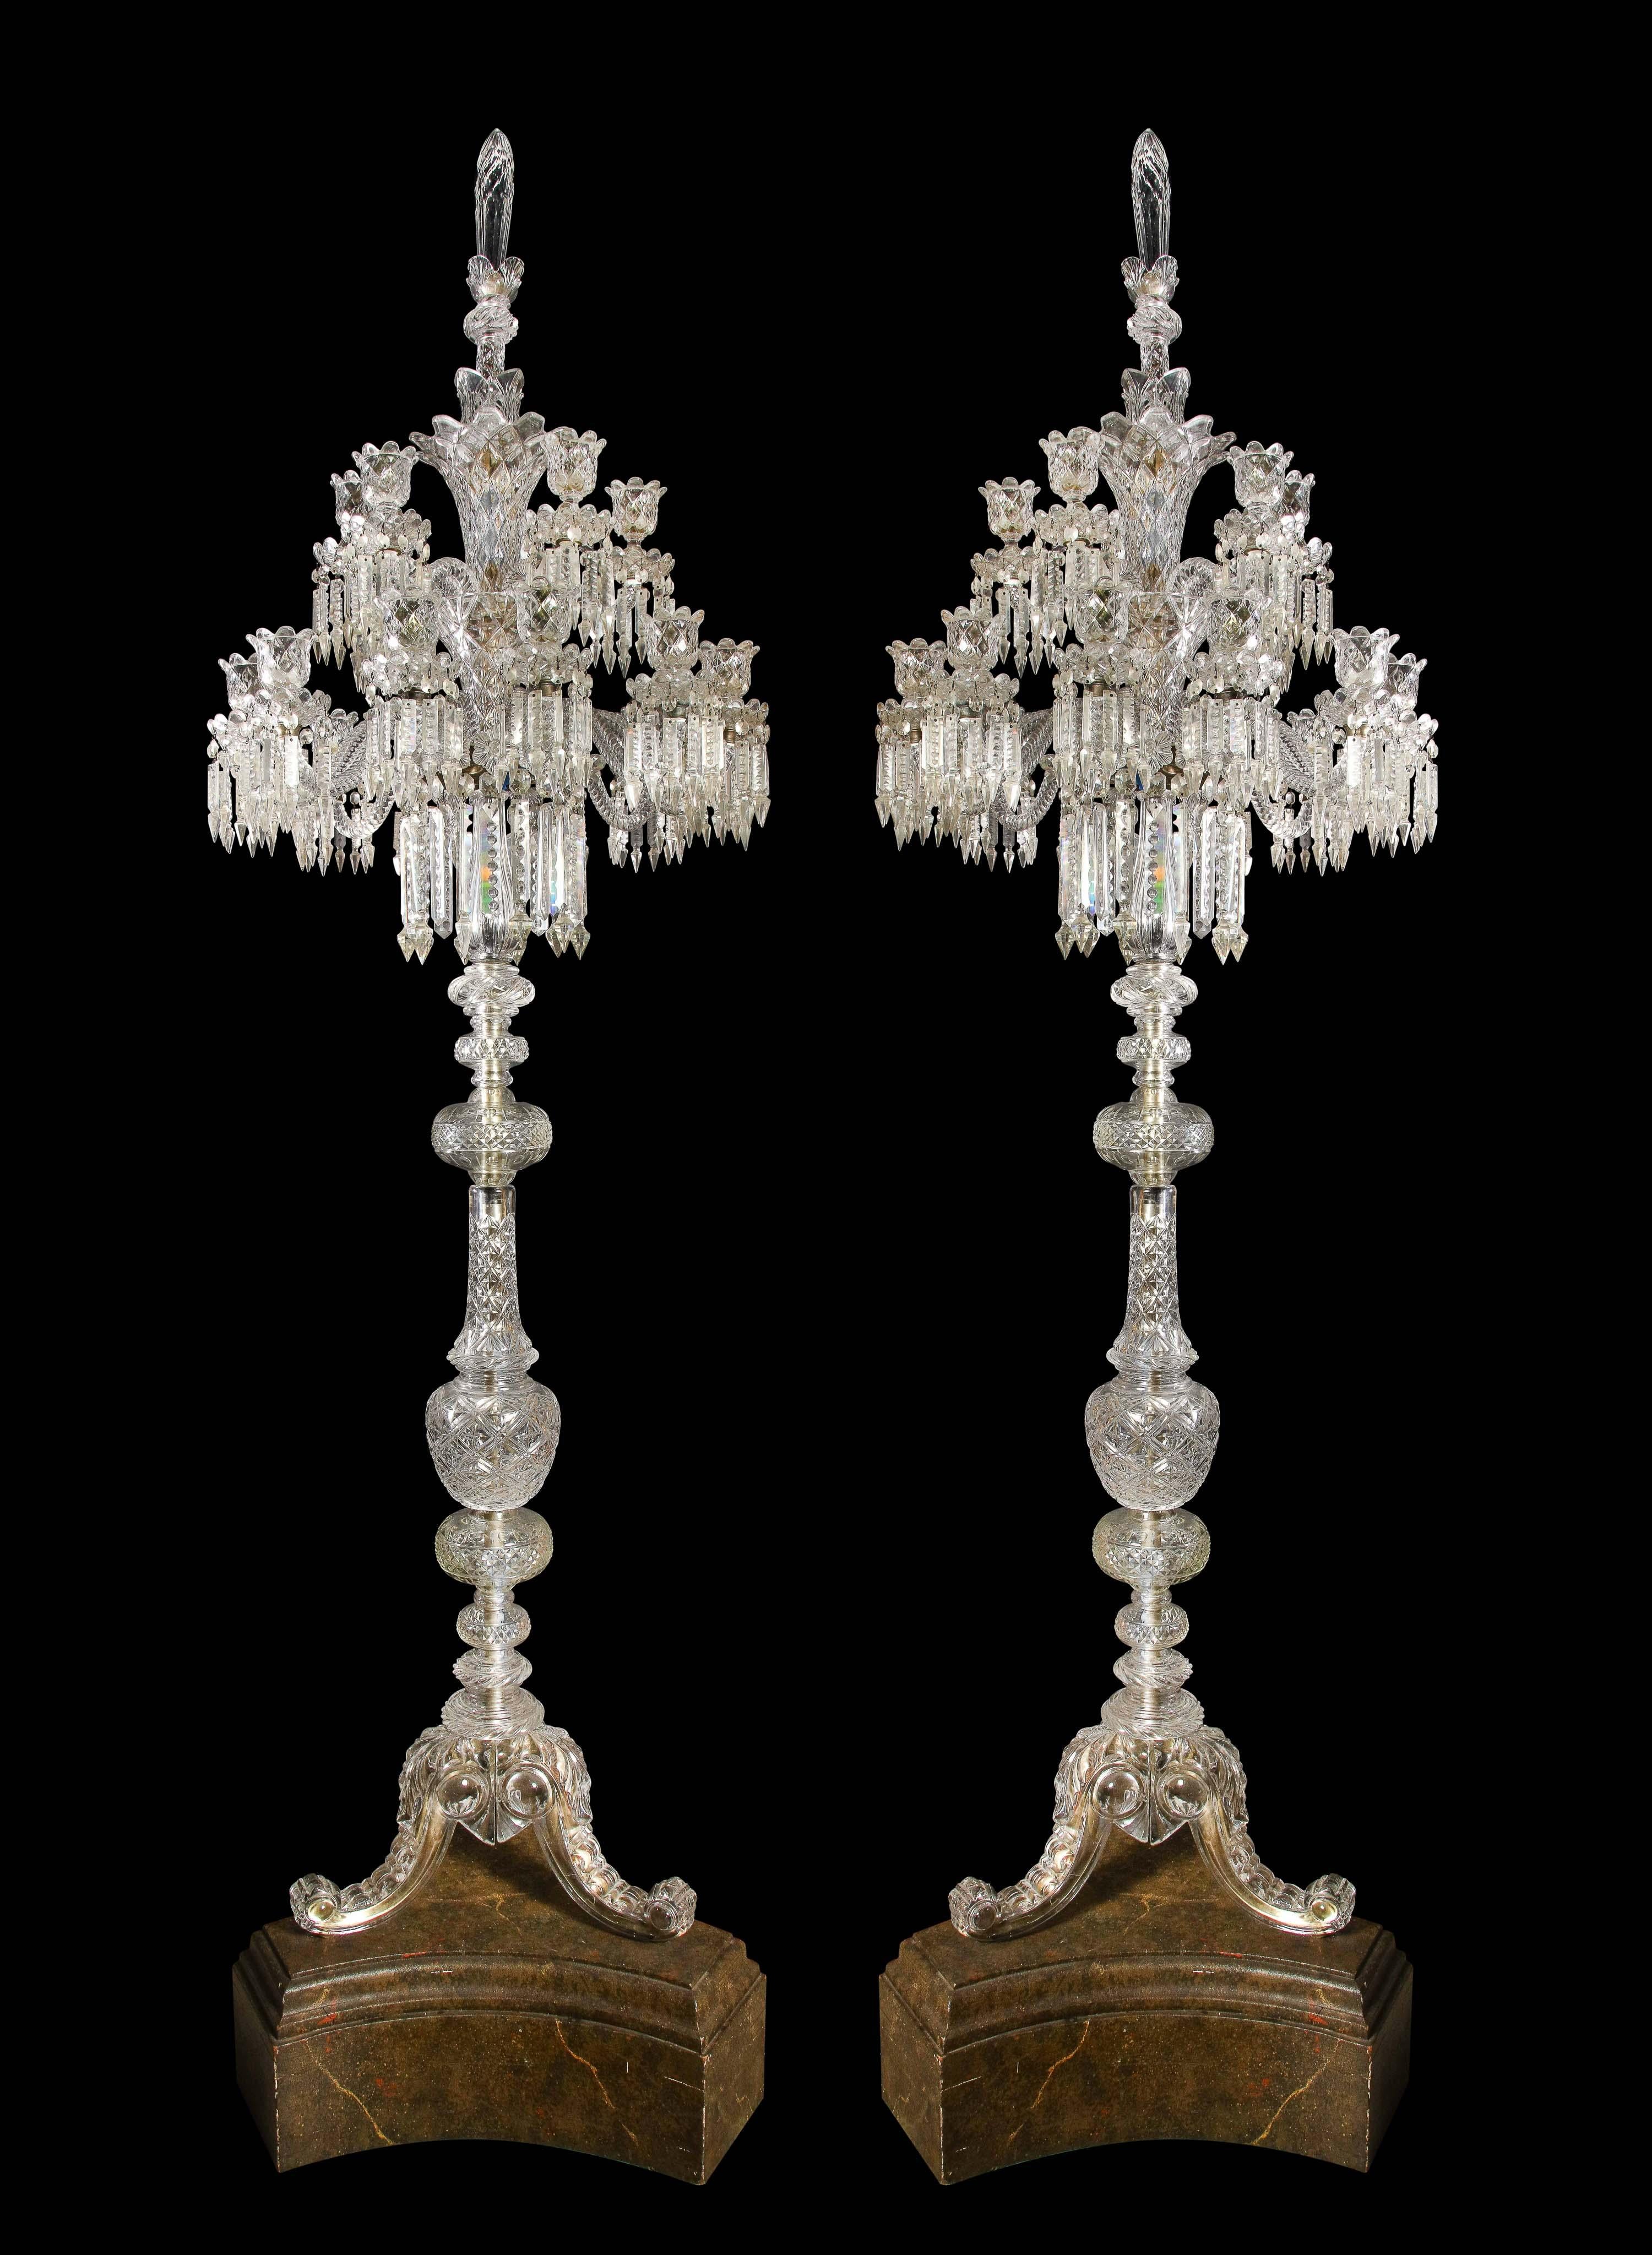 20th Century Cristalleries De Baccarat, a Large Pair of French Cut Crystal 18-Light Torcheres